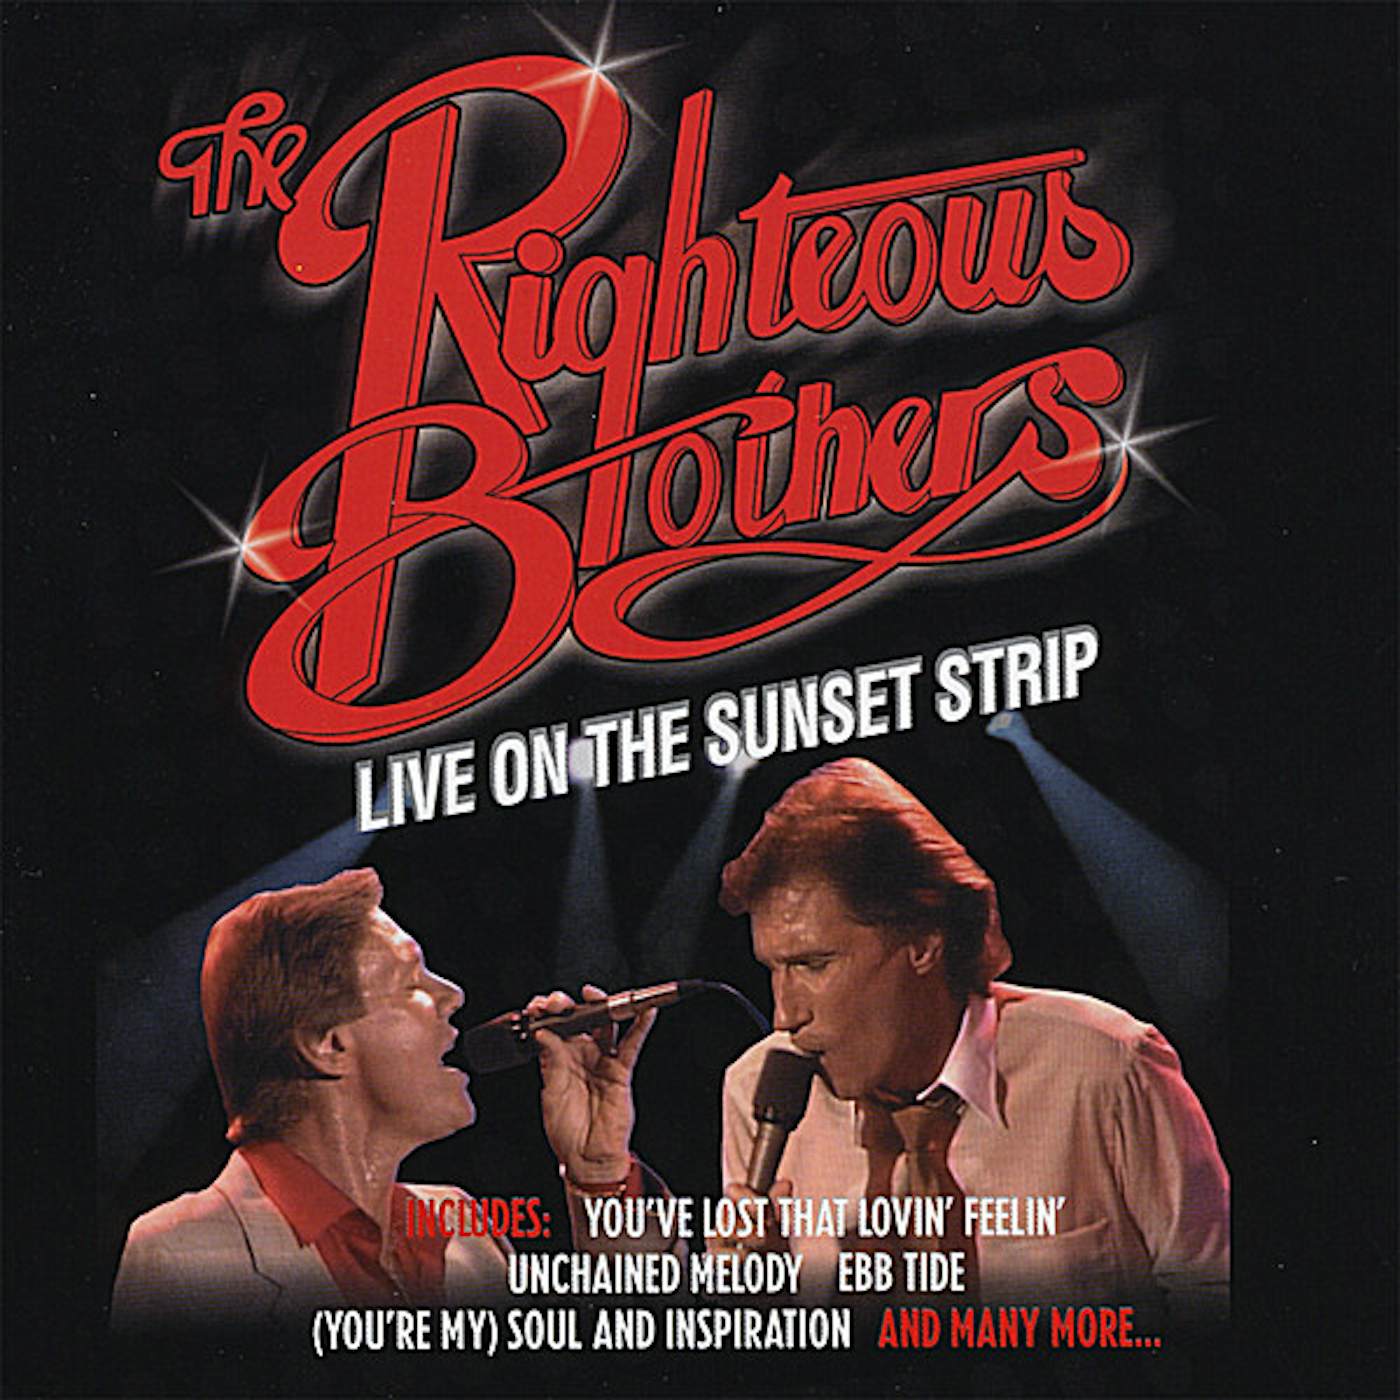 The Righteous Brothers: LIVE ON SUNSET STRIP CD